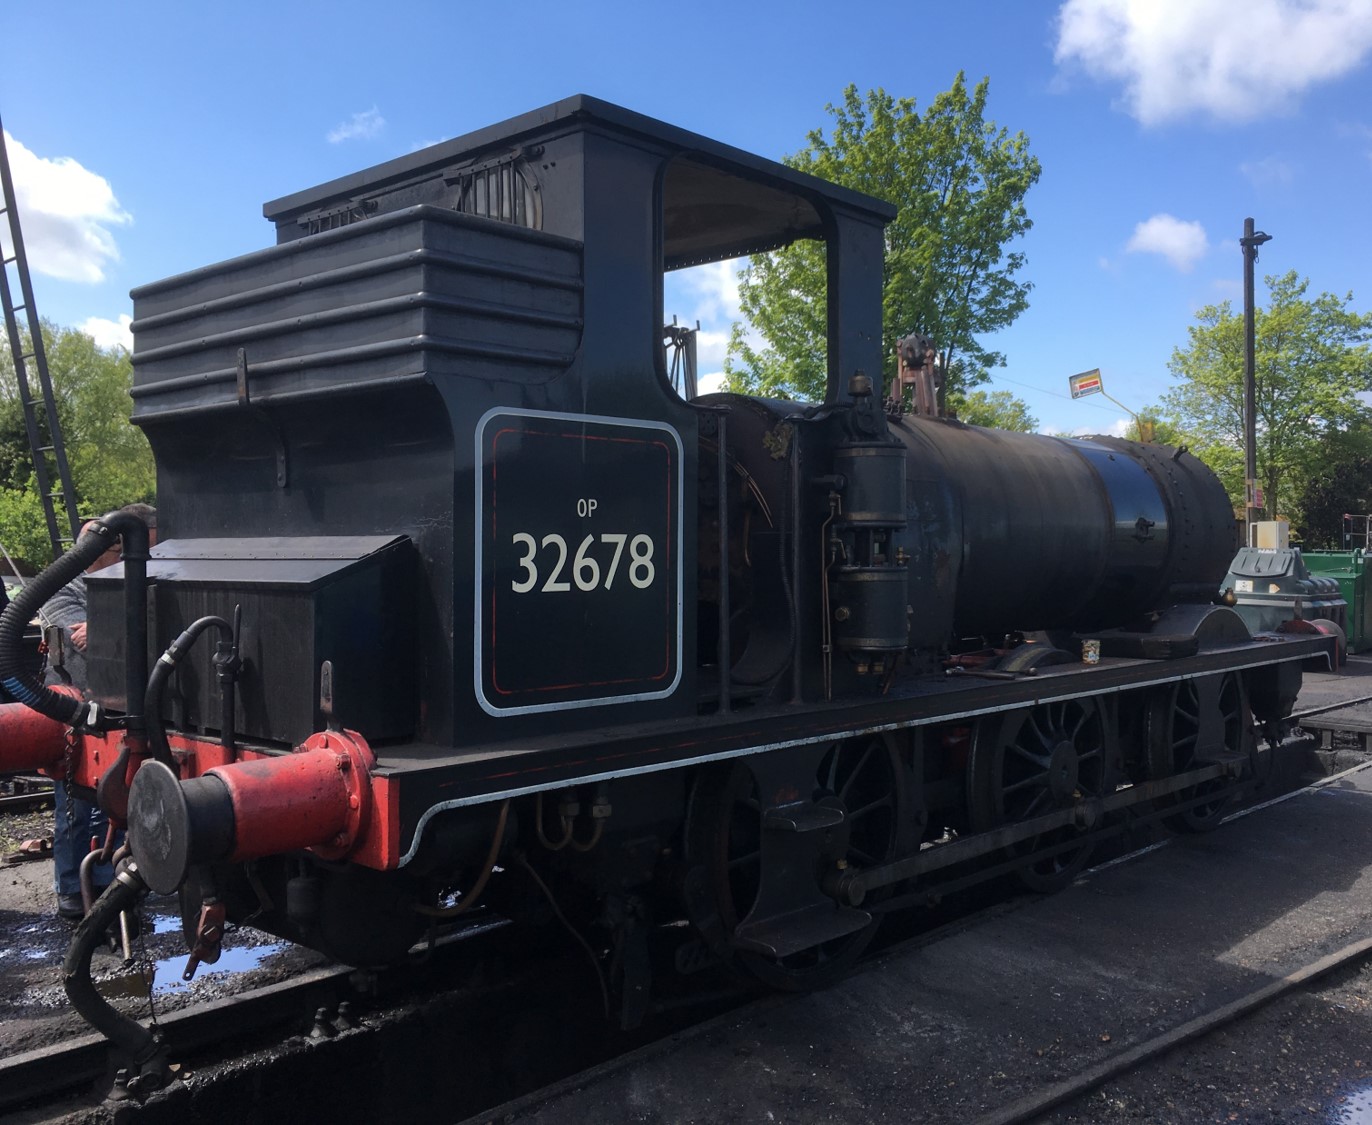 2678 largely dismantled at Rolvenden on 11 May 2019 © Graham Hukins